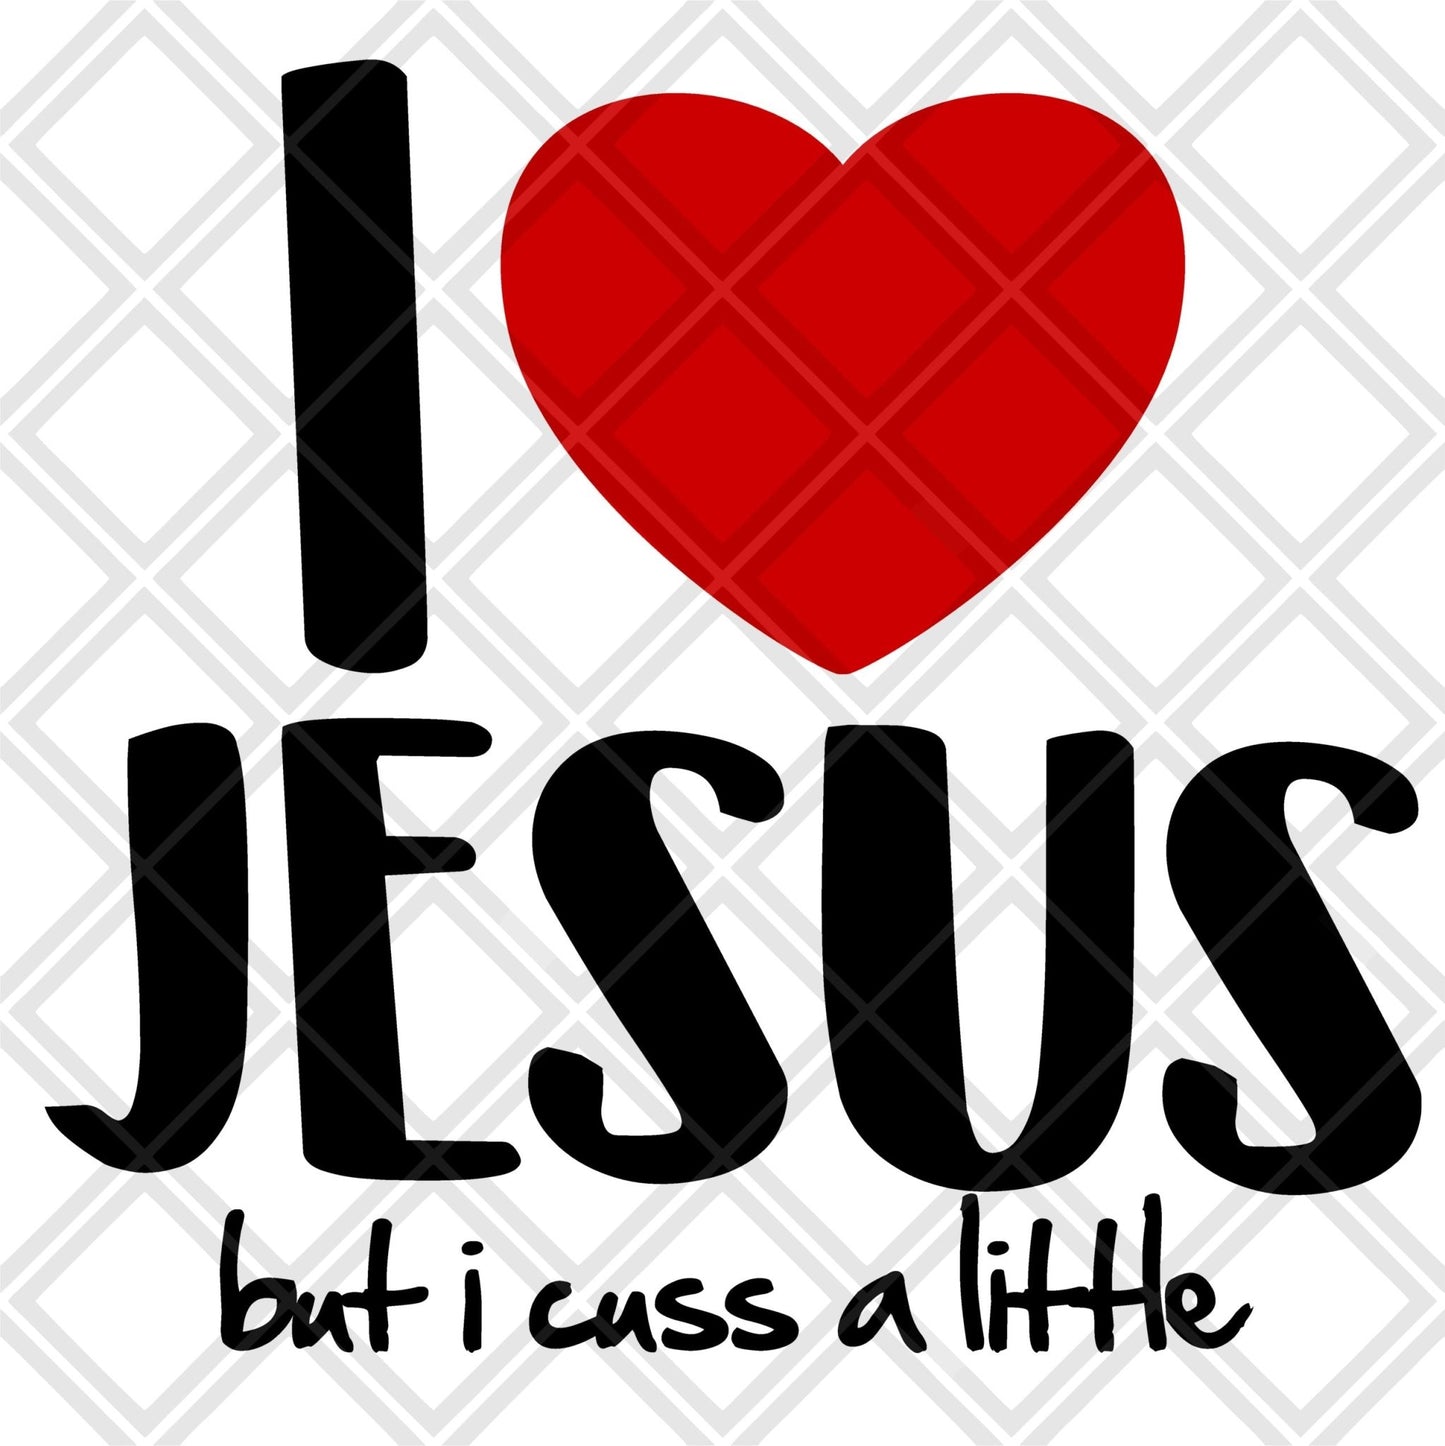 I LOVE JESUS BUT I CUSS A LITTLE NO FRAME Digital Download Instand Download - Do it yourself Transfers